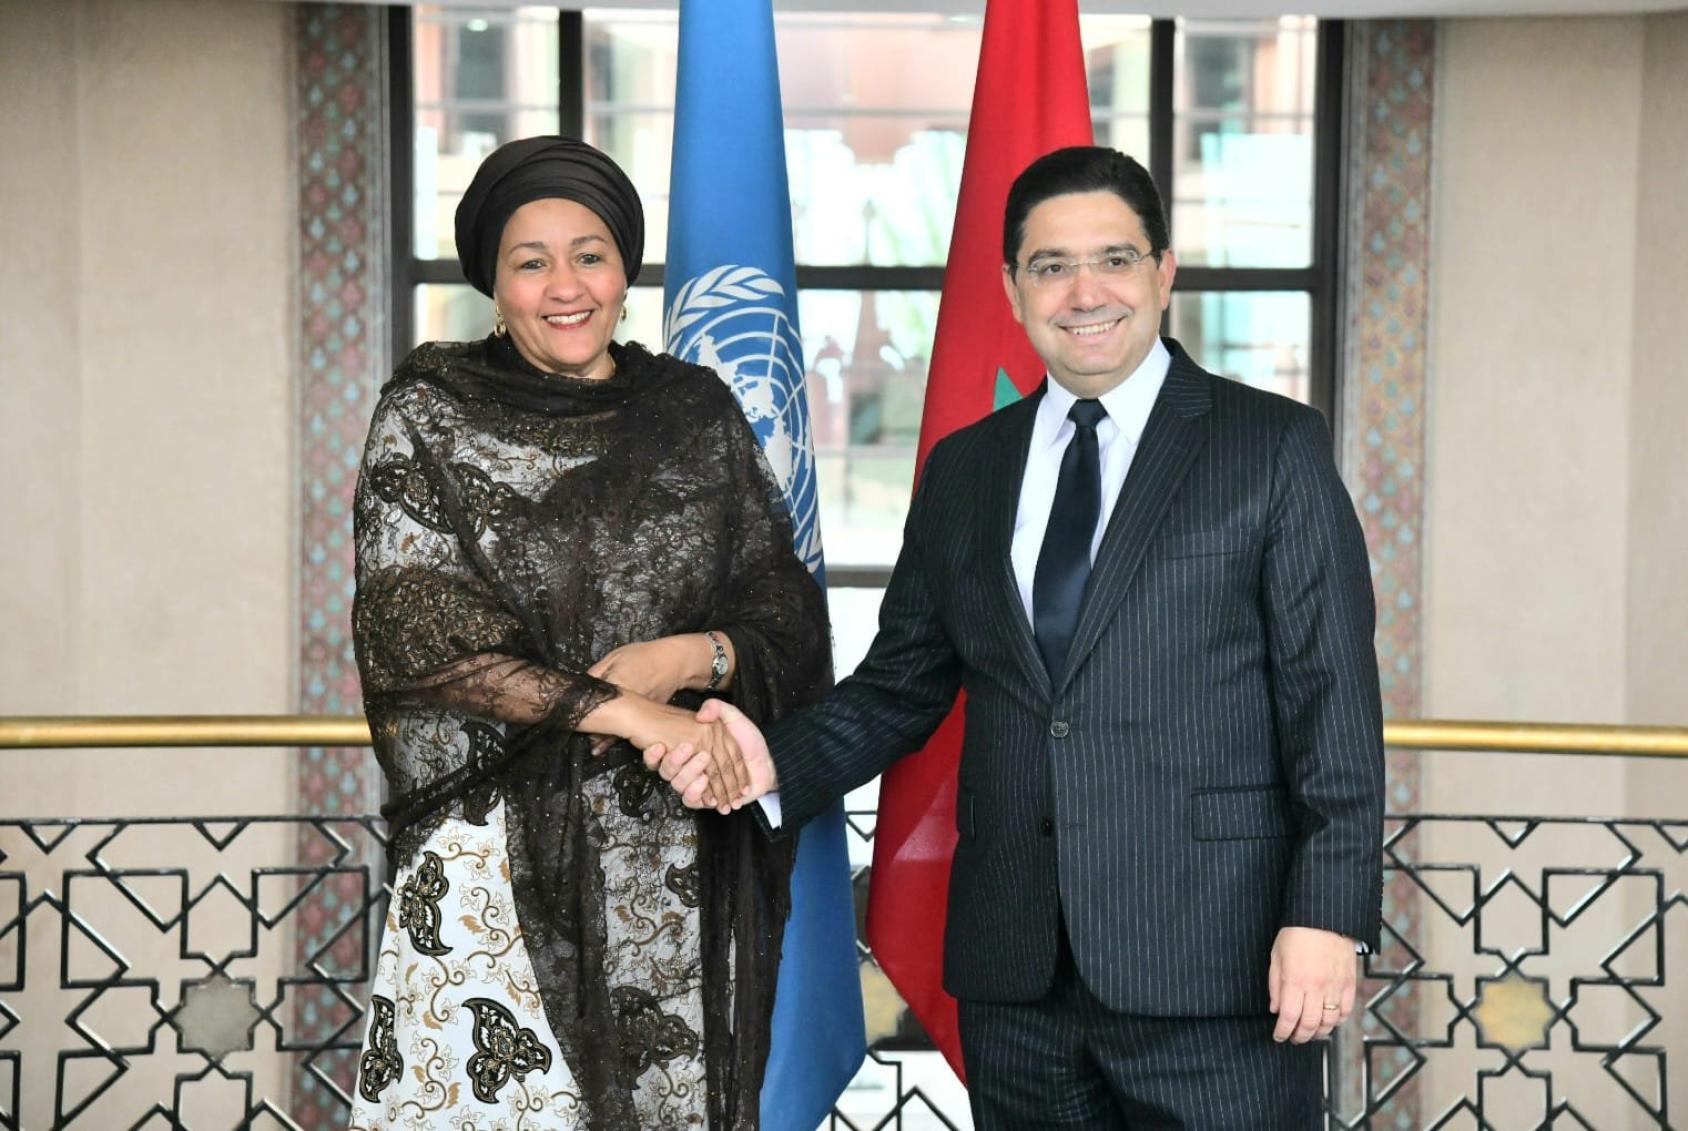 A woman in a black and grey clothing and headscarf shakes hands with a man in a black suit and spectacles against the background of two flags